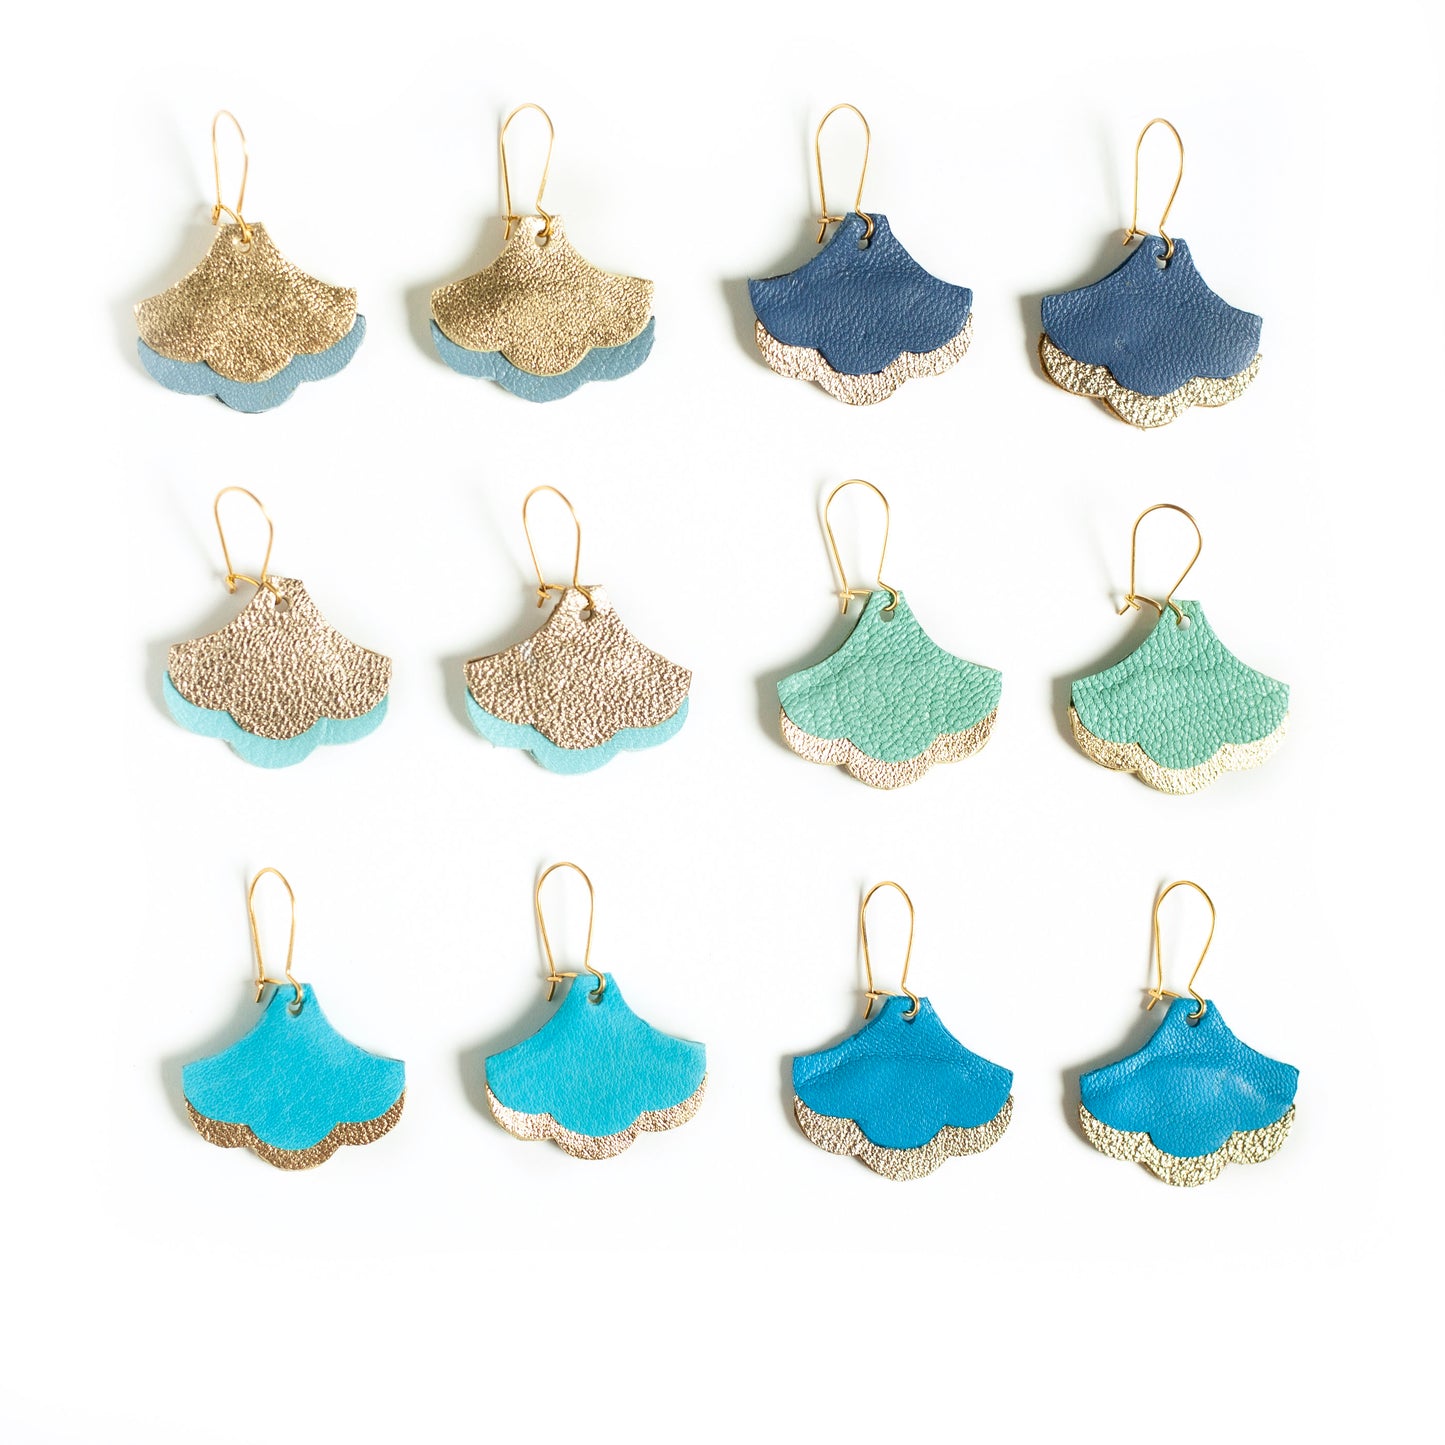 Ginkgo Biloba earrings in sky blue and gold leather